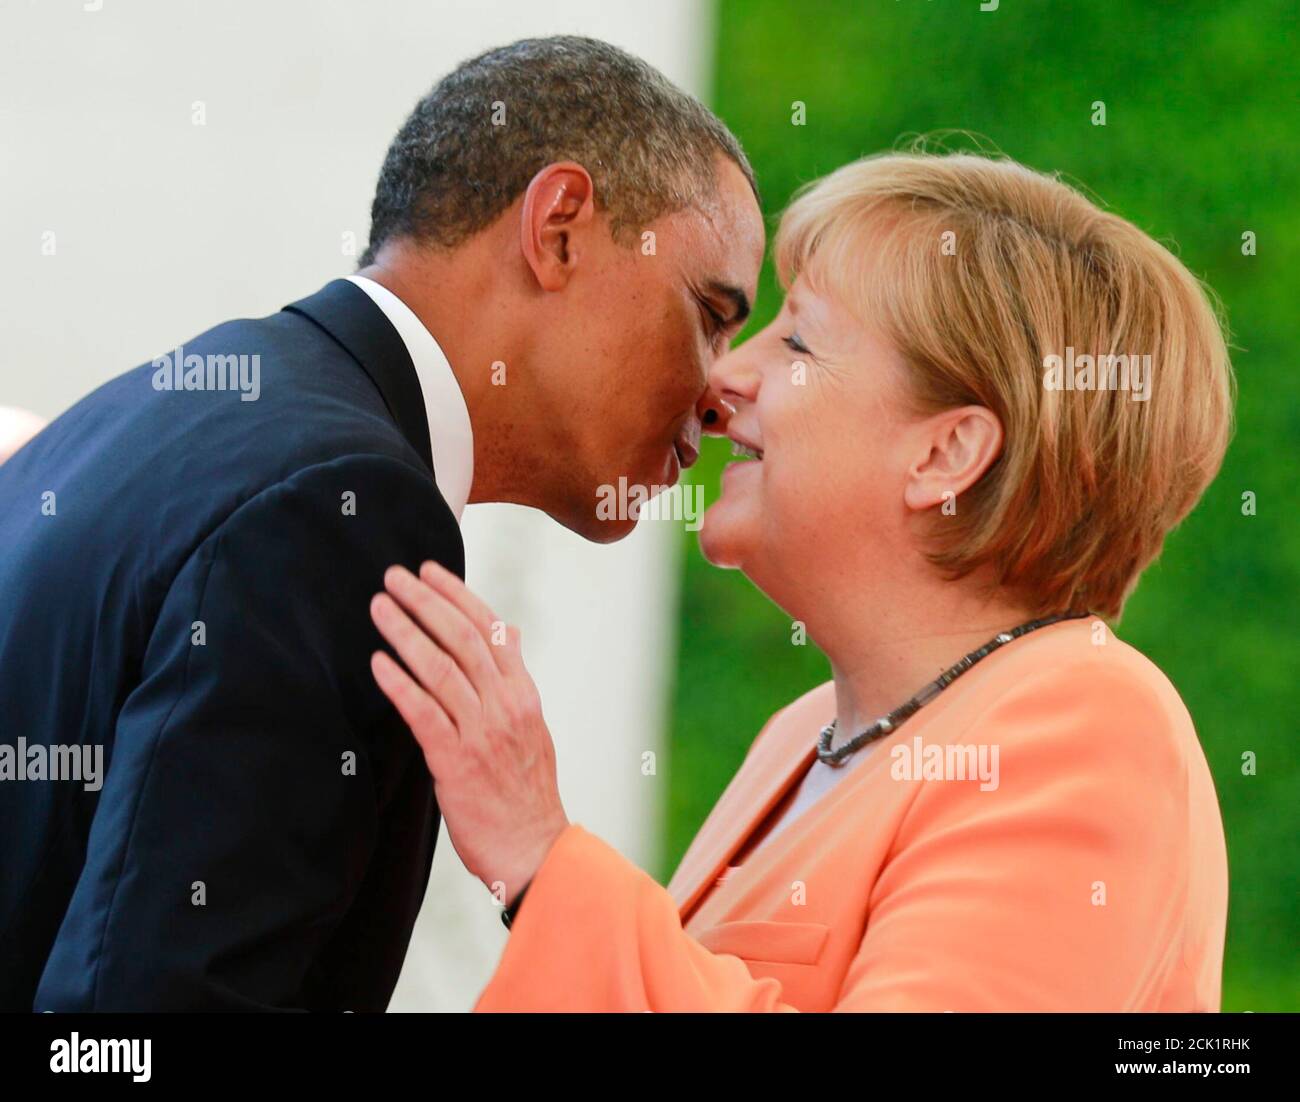 U.S. President Barack Obama embraces German Chancellor Angela Merkel outside the Chancellery in Berlin, June 19, 2013. Obama will unveil plans for a sharp reduction in nuclear warheads in a landmark speech at the Brandenburg Gate on Wednesday that comes 50 years after John F. Kennedy declared 'Ich bin ein Berliner' in a defiant Cold War address.     REUTERS/Thomas Peter (GERMANY  - Tags: POLITICS) Stock Photo